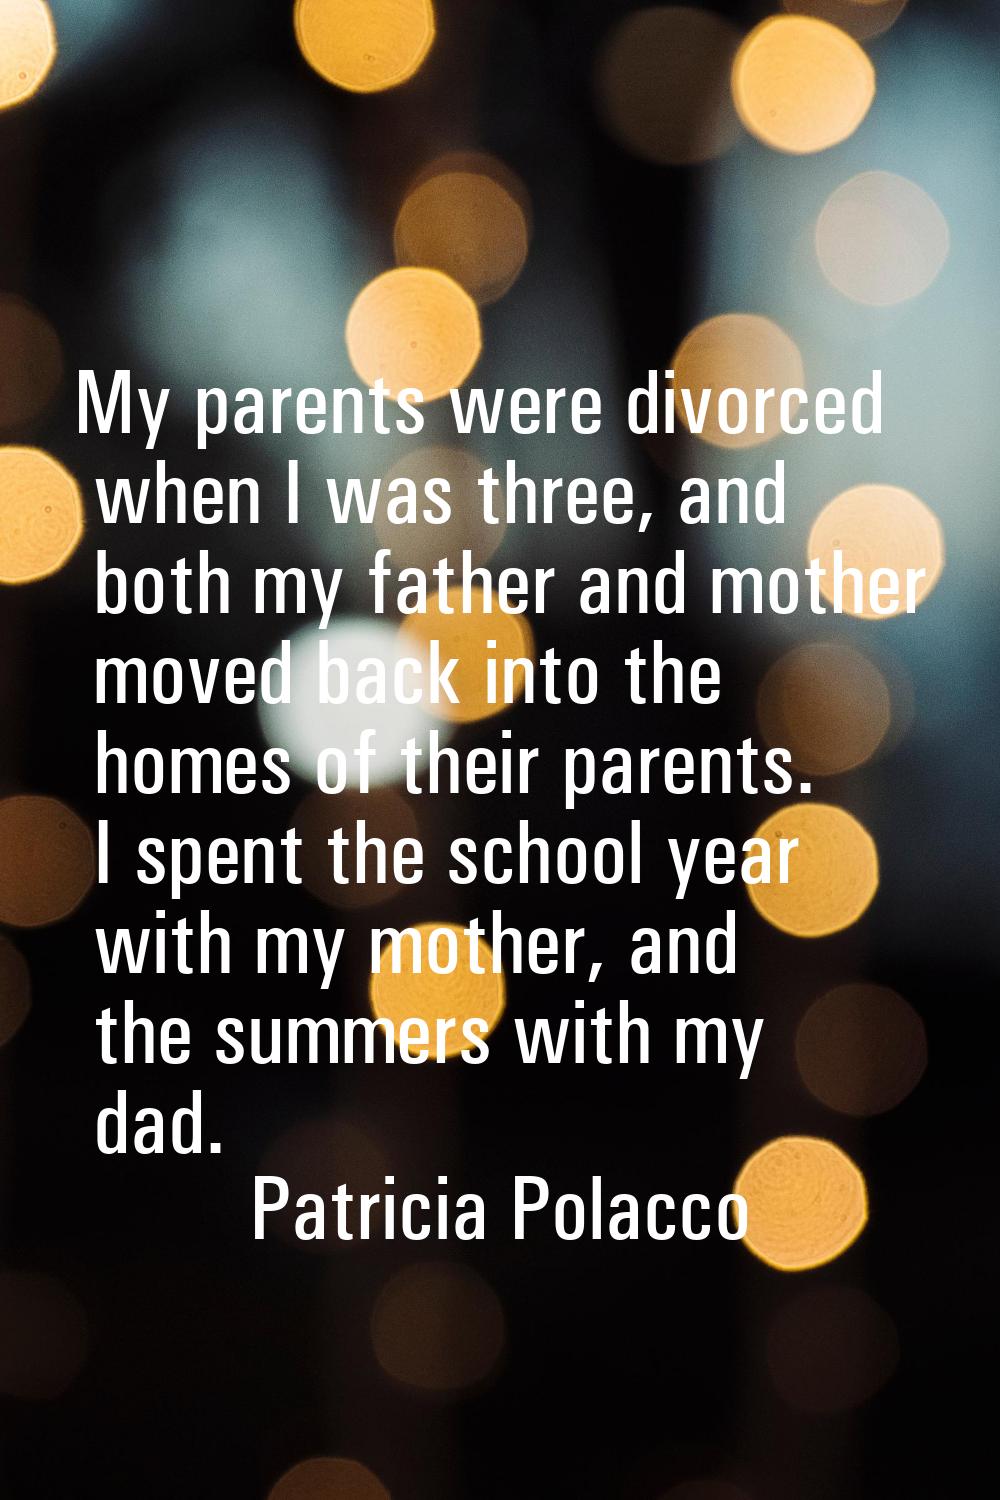 My parents were divorced when I was three, and both my father and mother moved back into the homes 